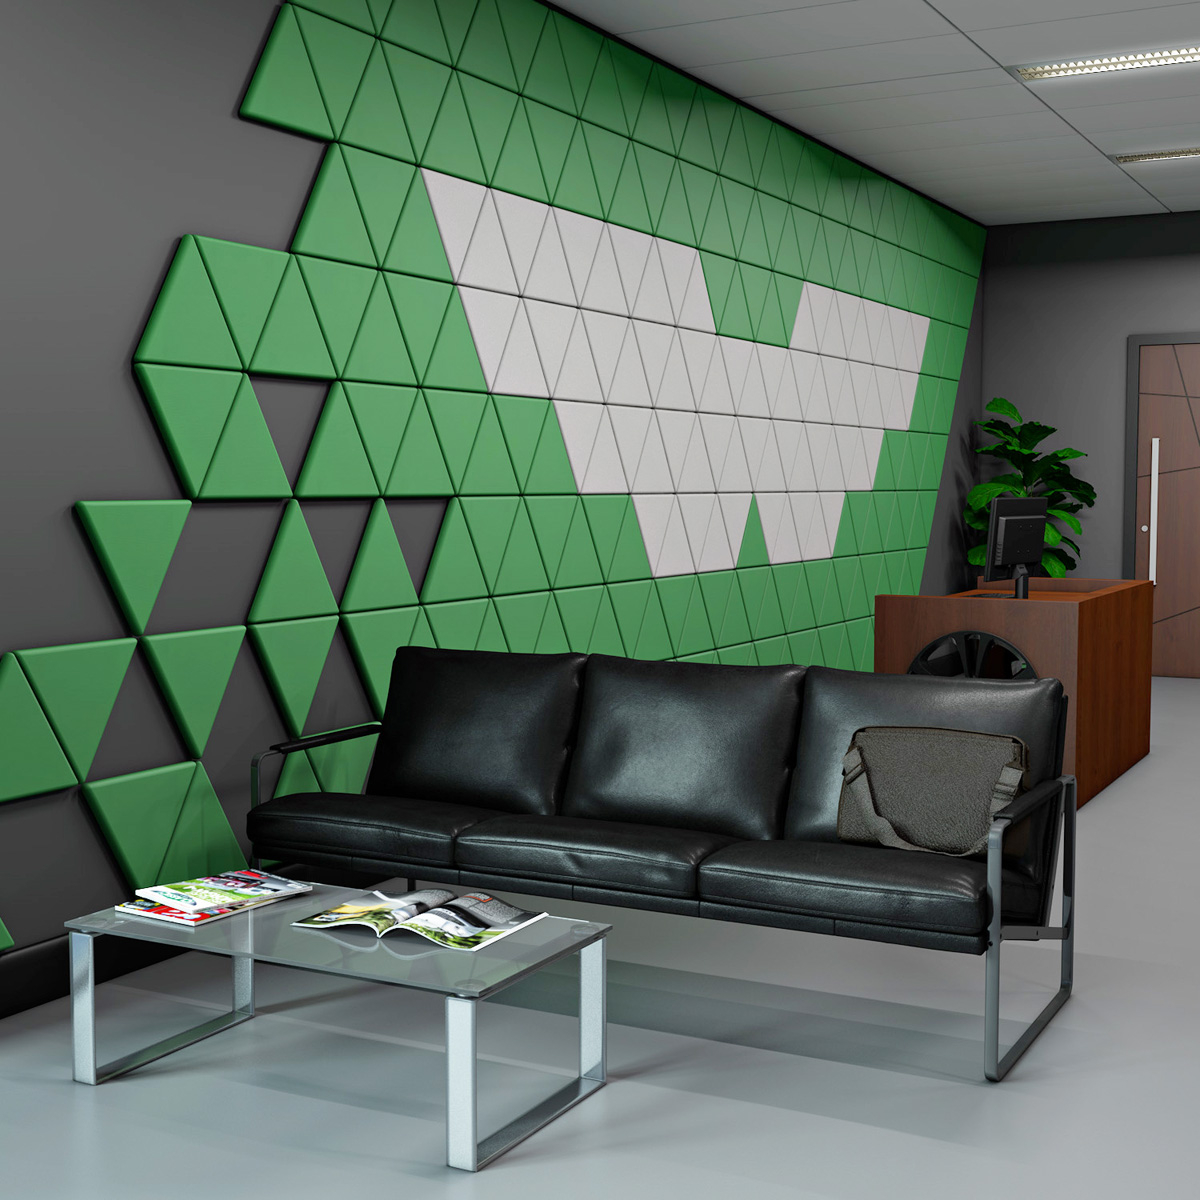 VIRAGE Triangular Acoustic Wall Soundproofing Panels